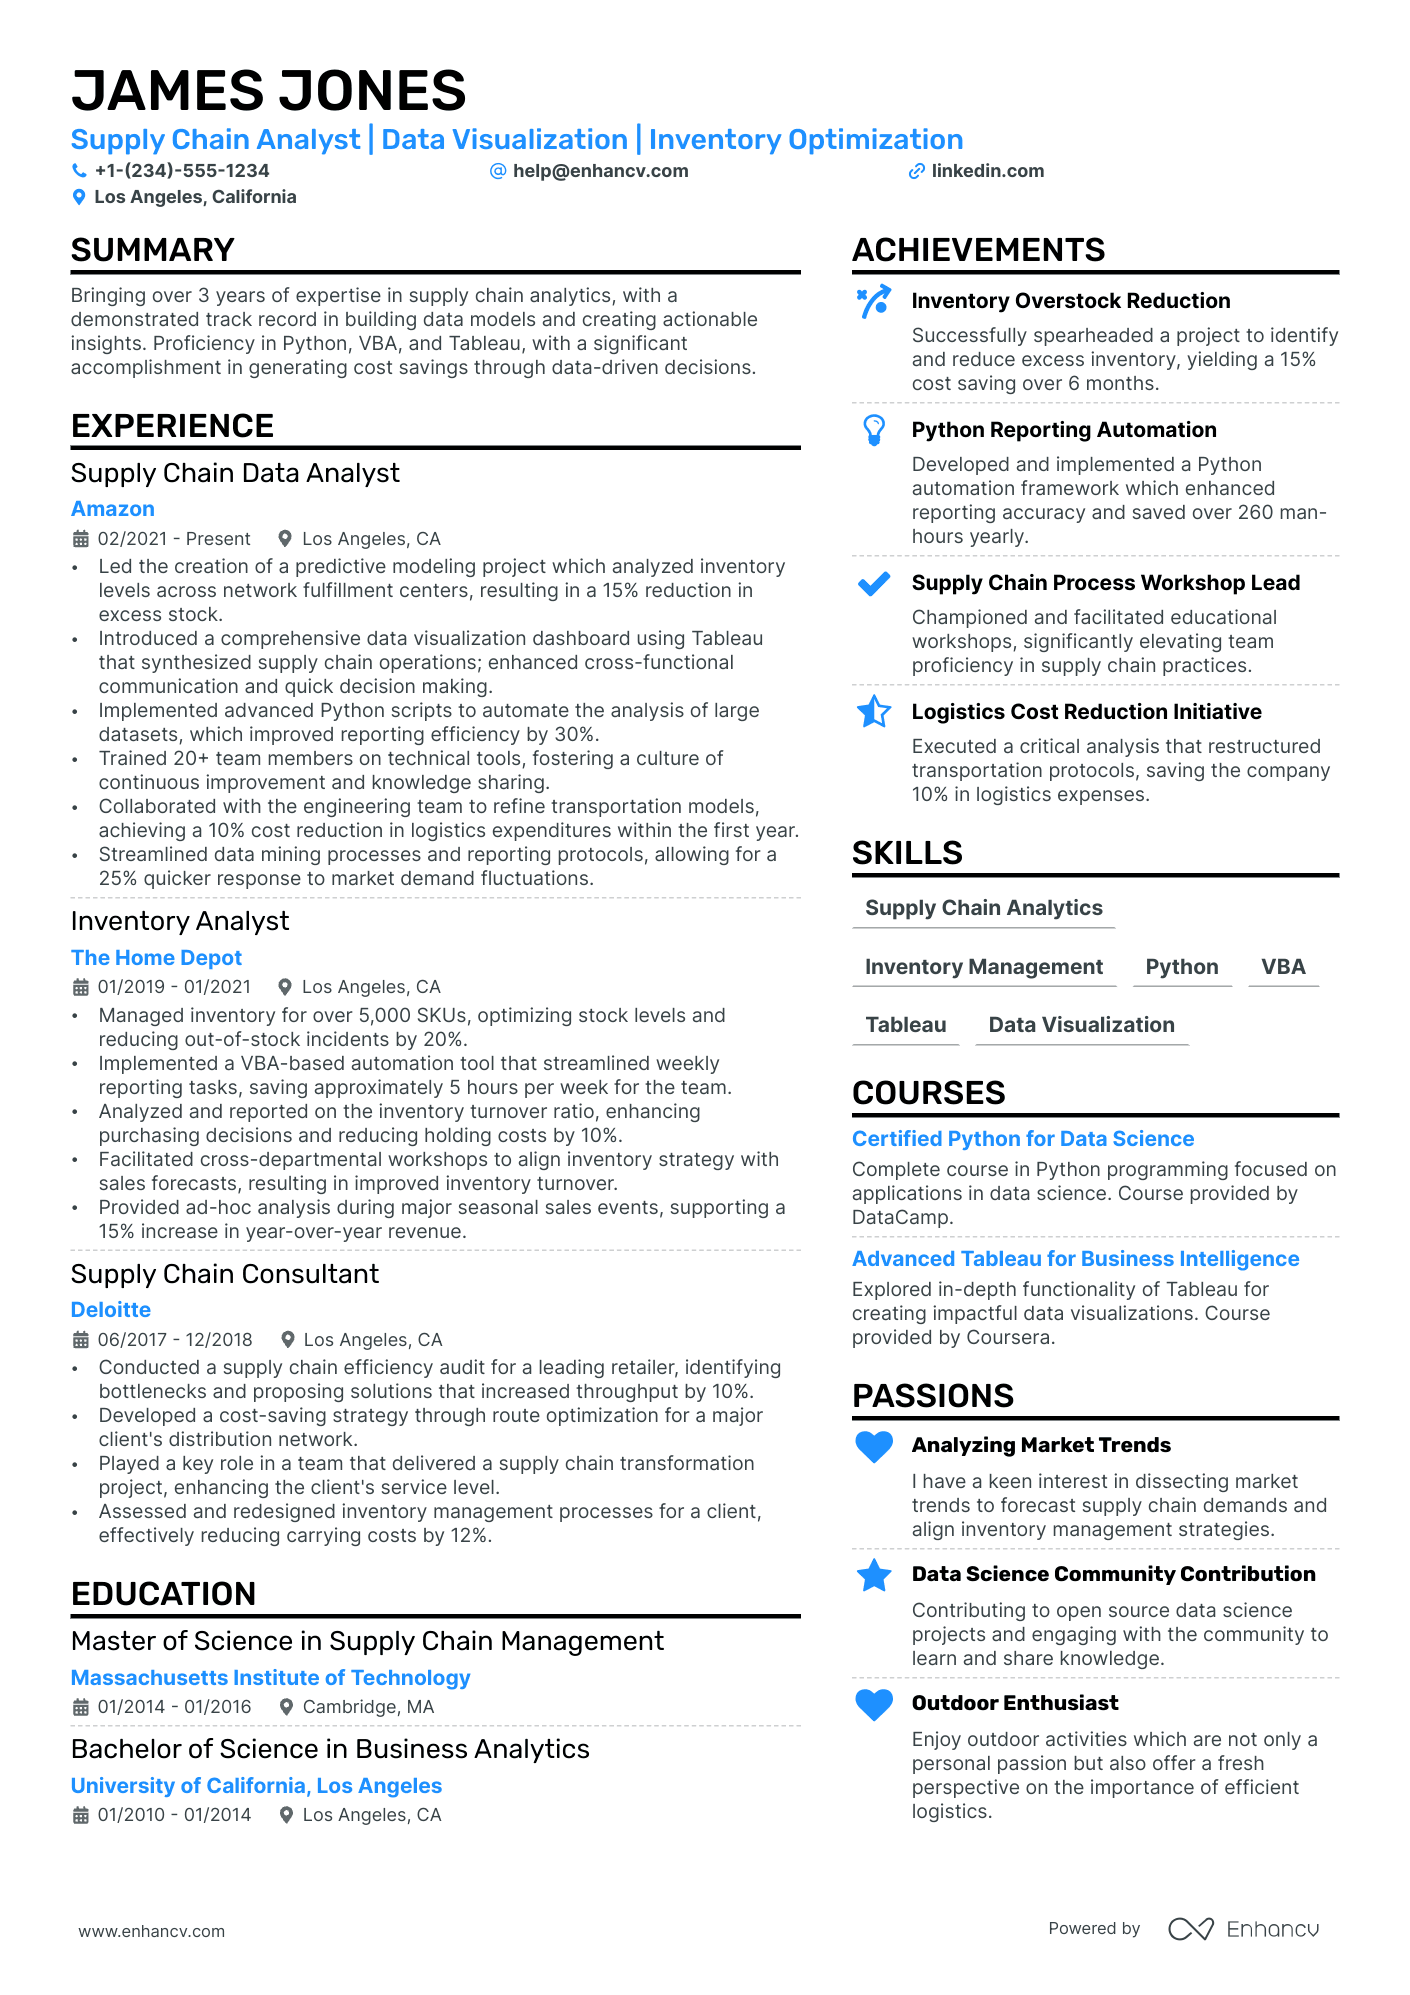 Supply Chain Business Analyst resume example